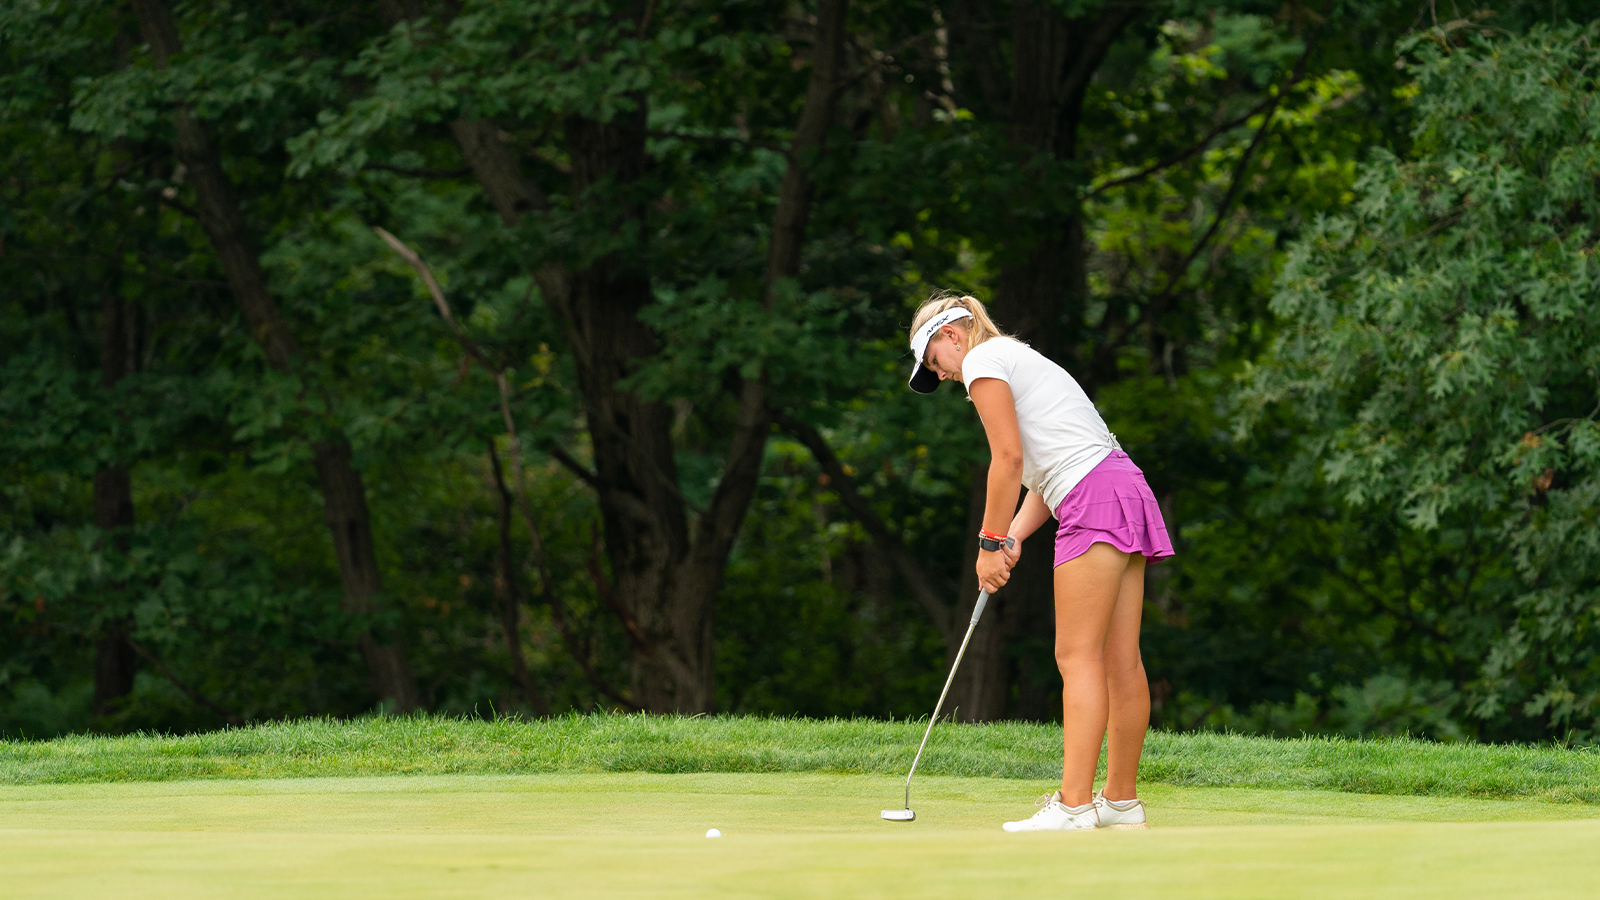 Kaitlyn Schroeder makes her putt on the 17th hole during the final round for the 46th Boys and Girls Junior PGA Championship held at Cog Hill Golf & Country Club on August 5, 2022 in Lemont, Illinois. (Photo by Hailey Garrett/PGA of America)